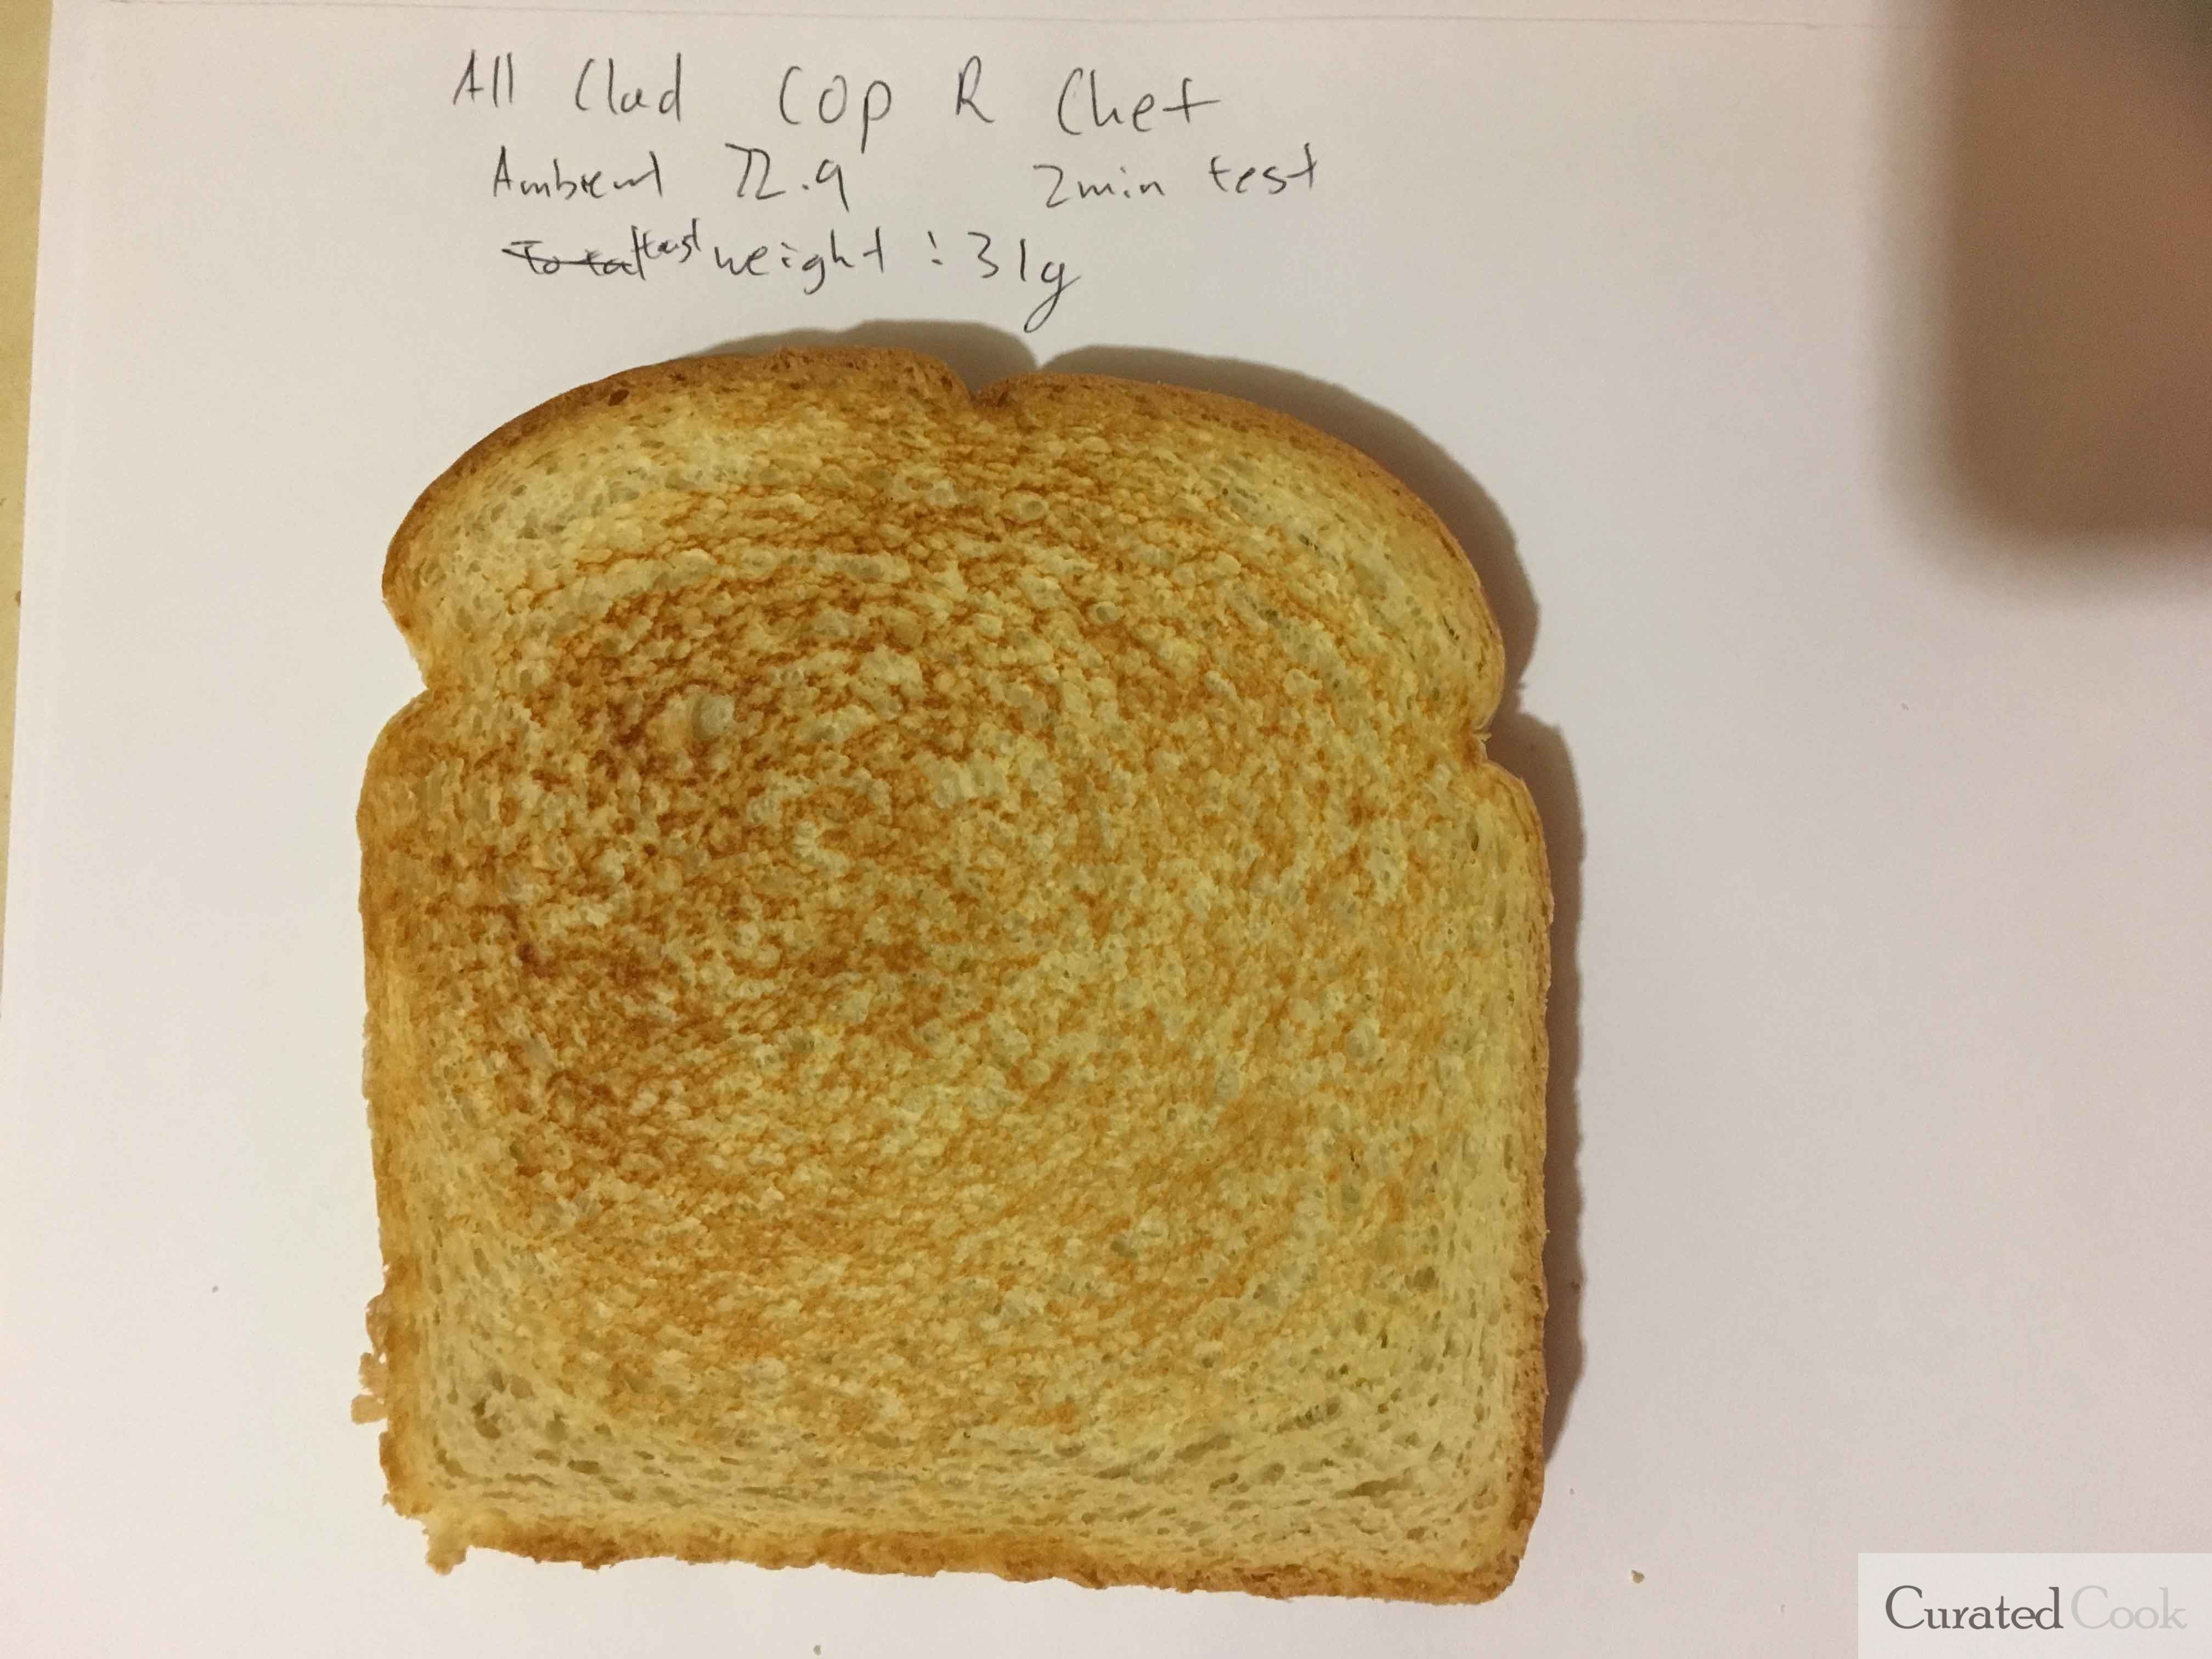 All Clad coppr chef toast test result